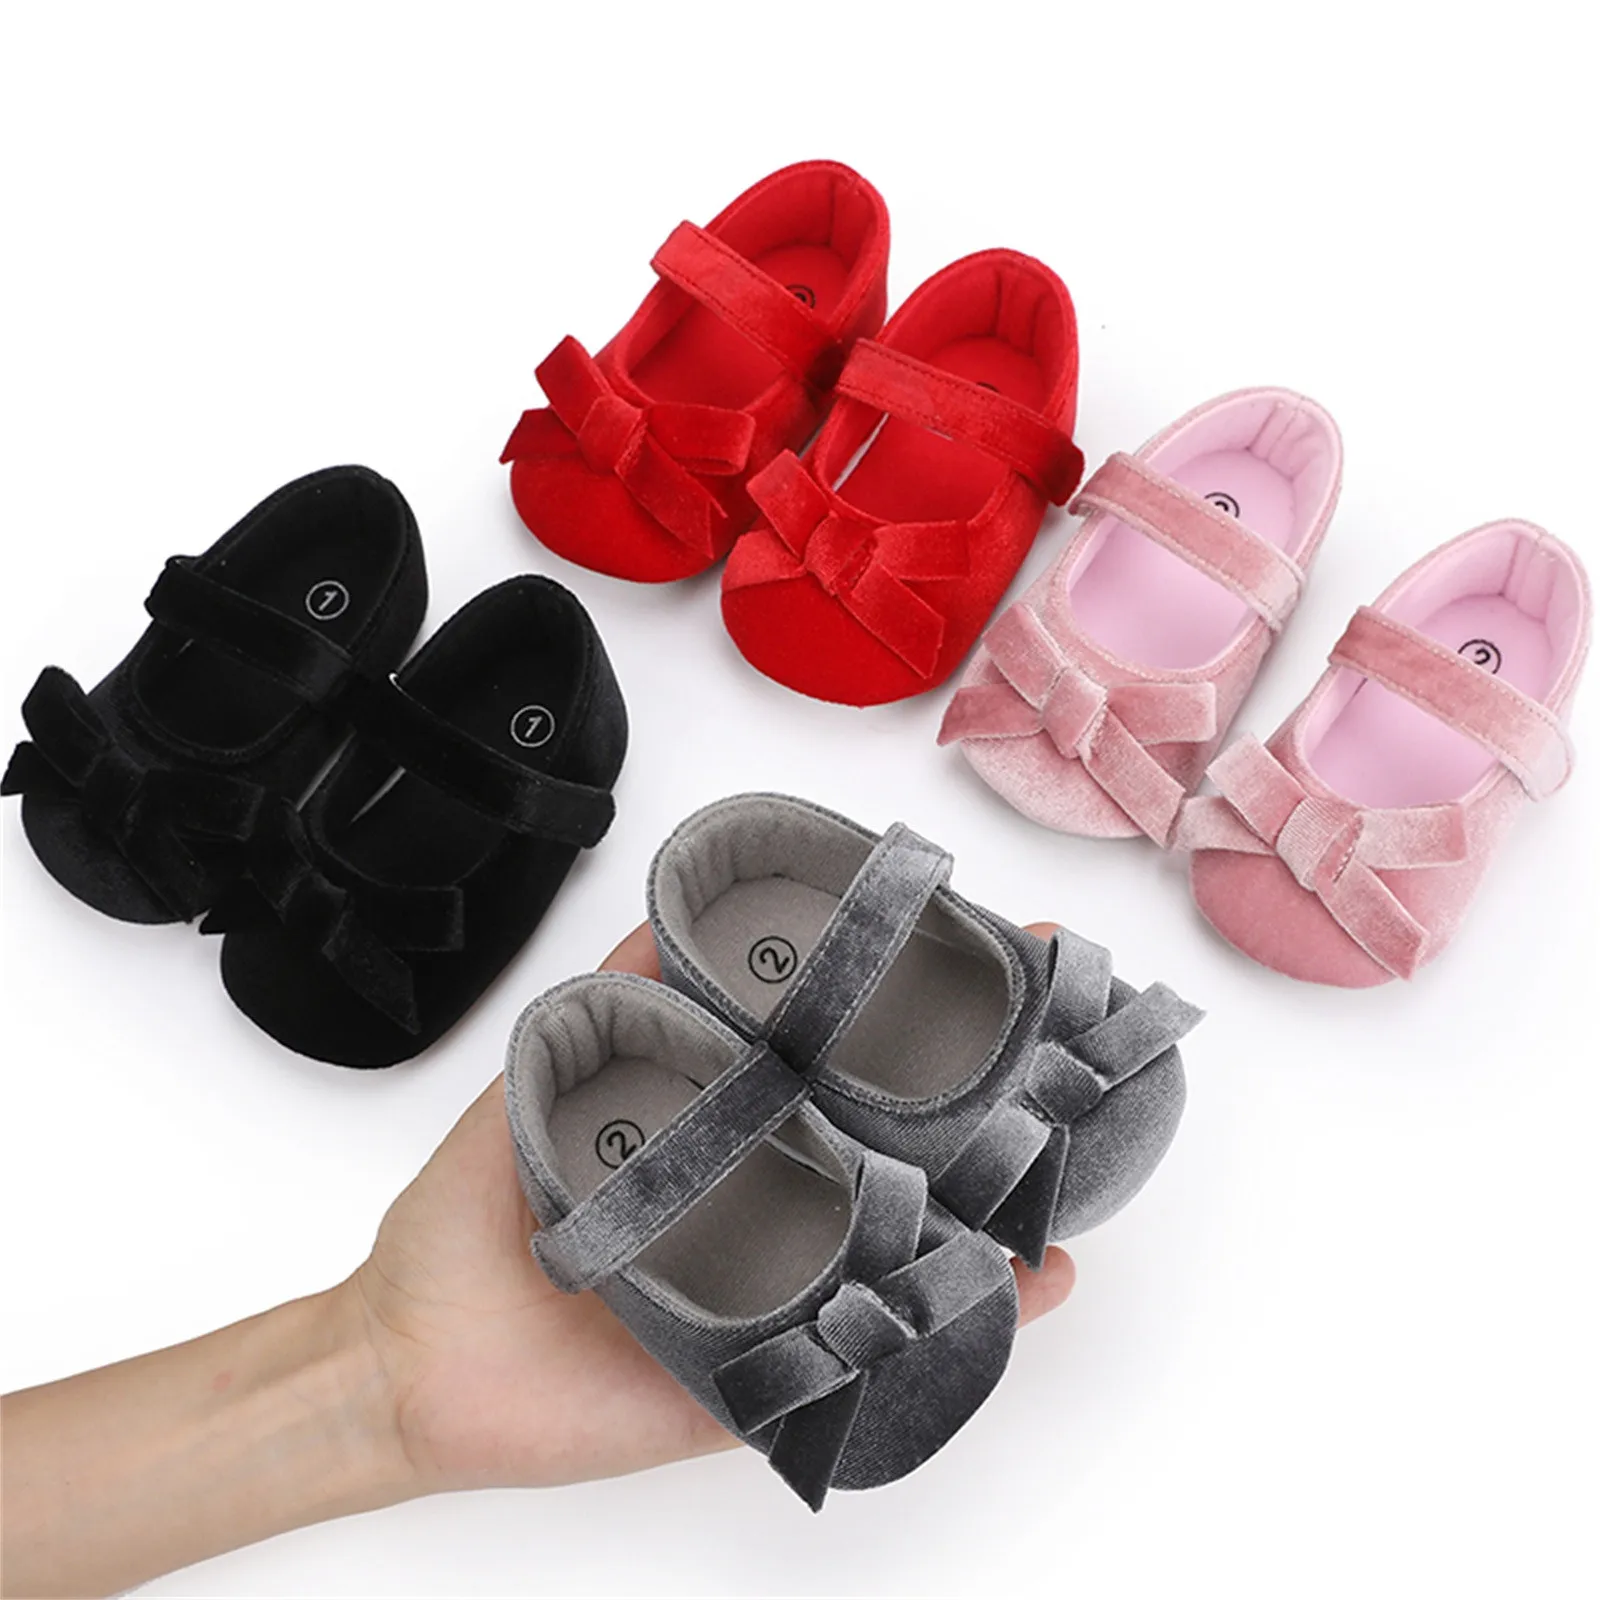 

Infant Baby Girls Walkers Shoes Flats Bowknot Soft Anti-slip Rubber Sole 0-18M Newborn Shoes Toddler First Walker Princess Shoes